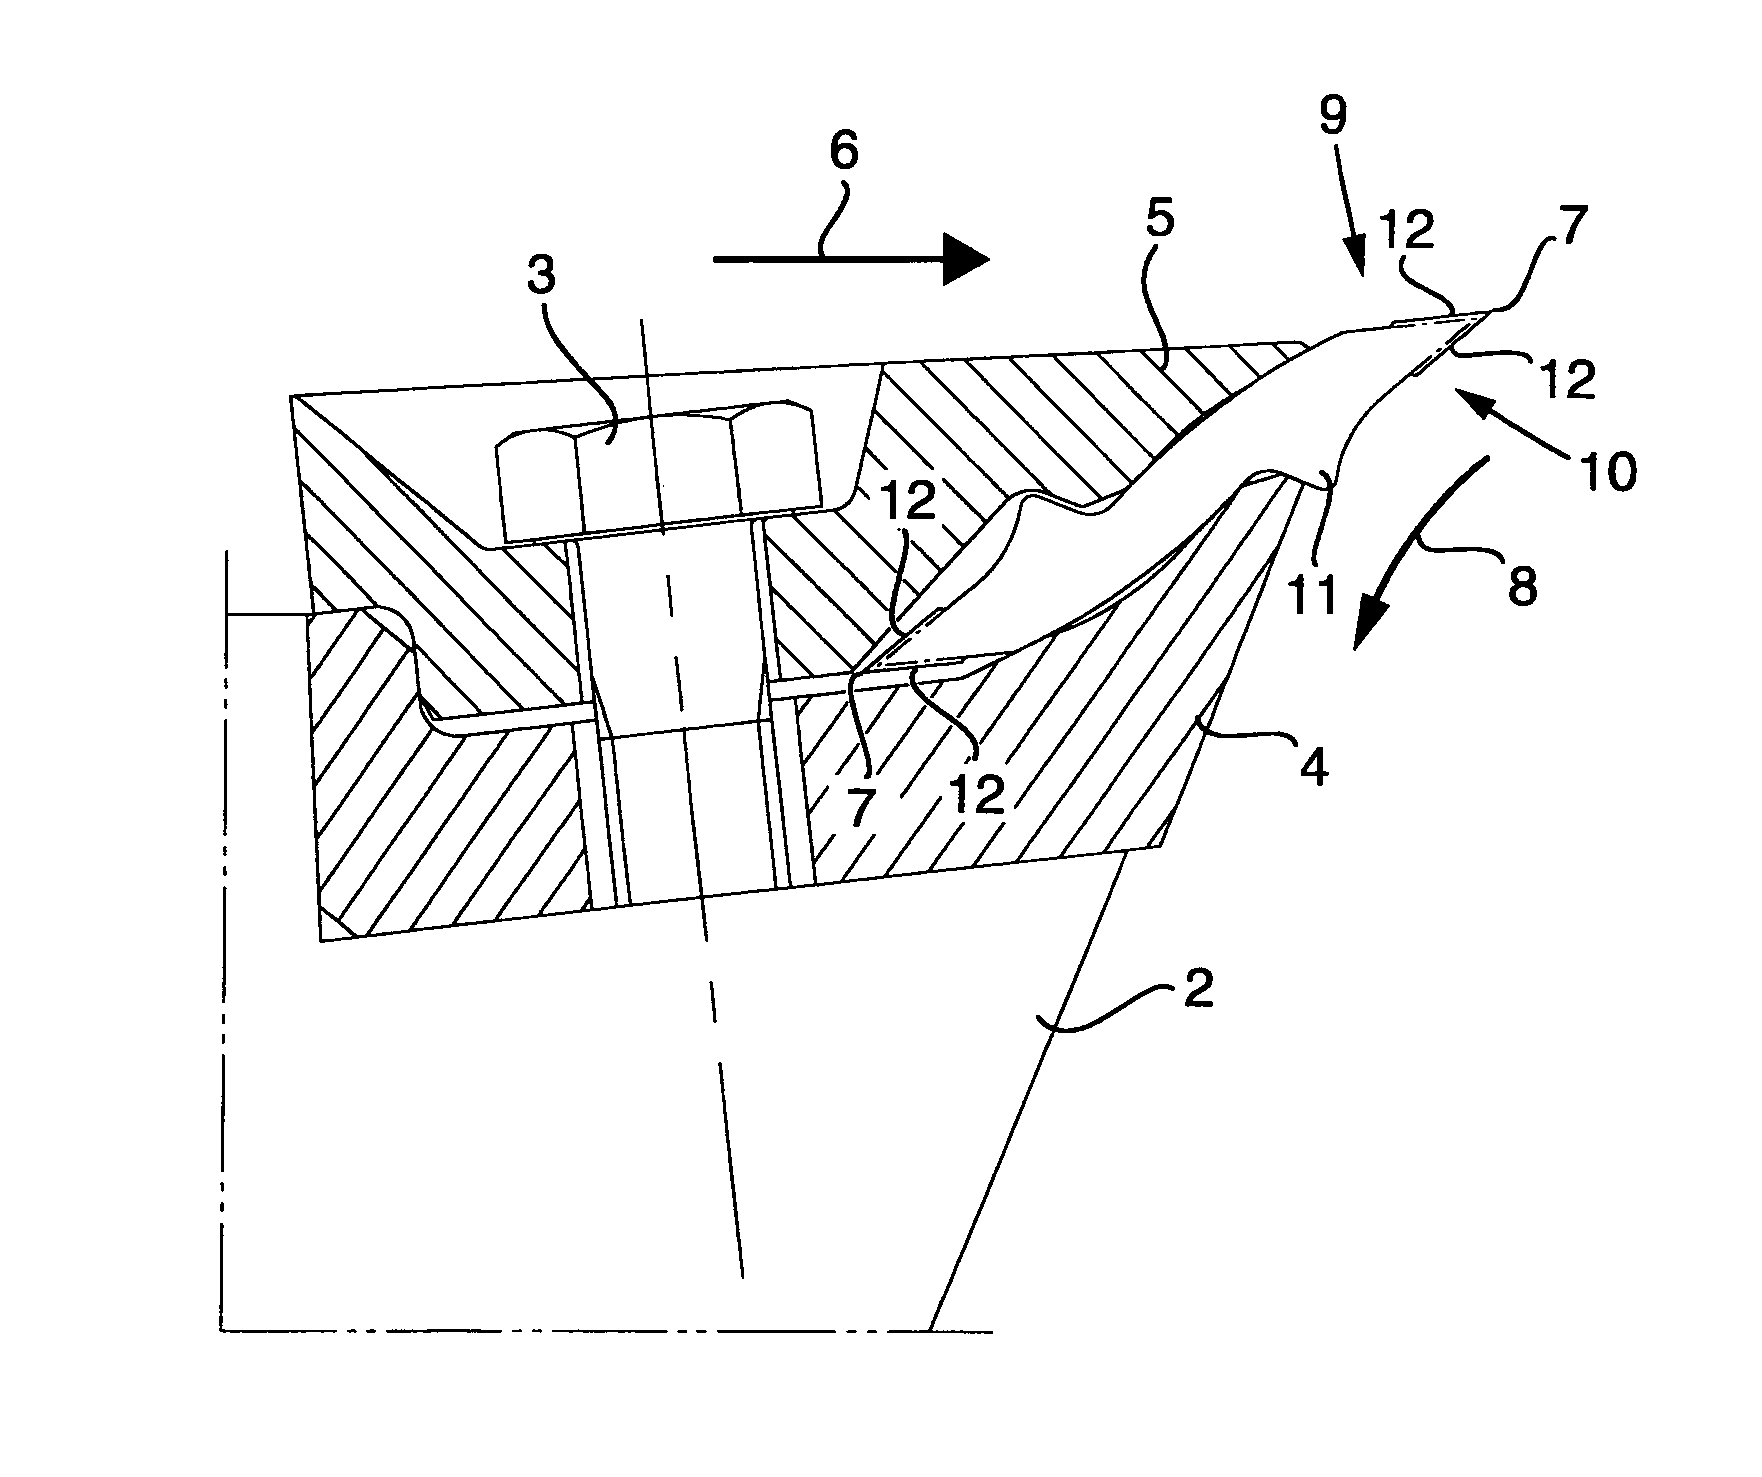 Chipper Knife and Method of Manufacturing a Chipper Knife